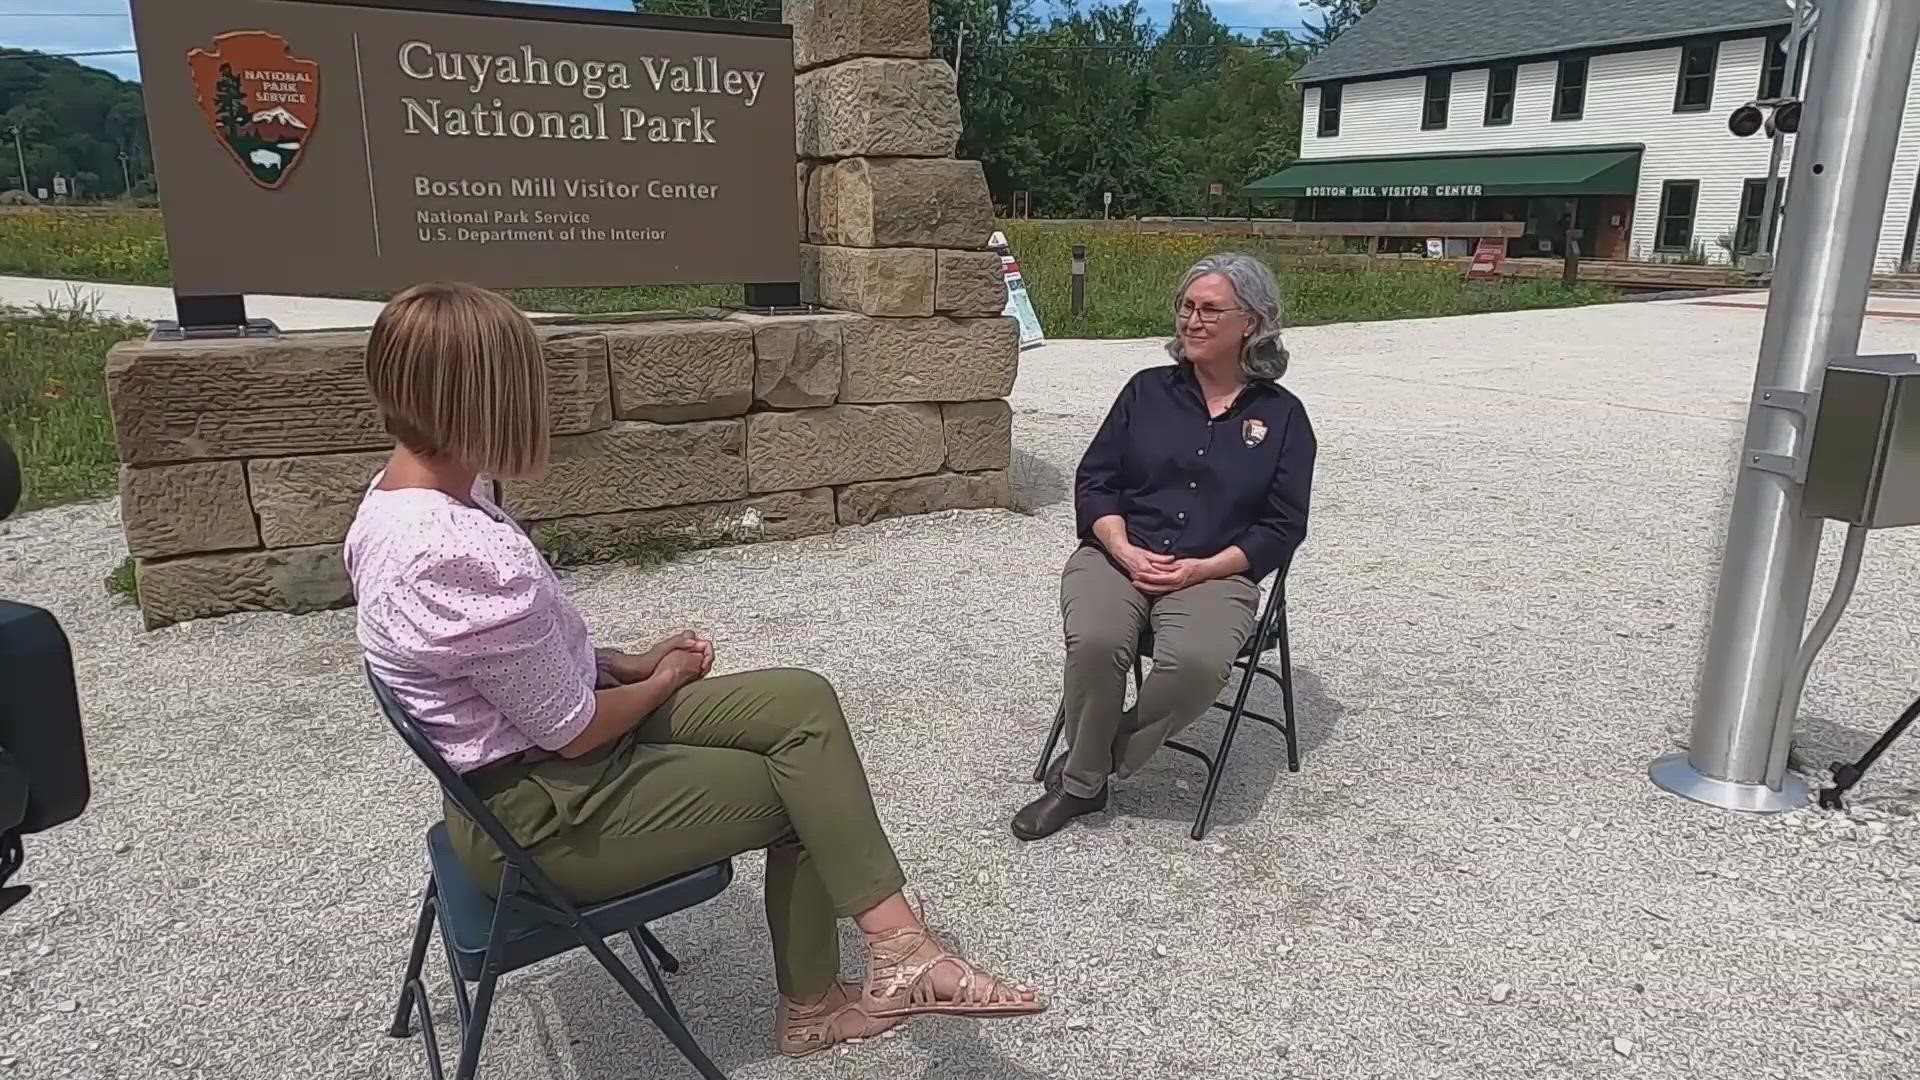 Petit is the first woman to serve as Superintendent of the Cuyahoga Valley National Park since it was established in 1974.